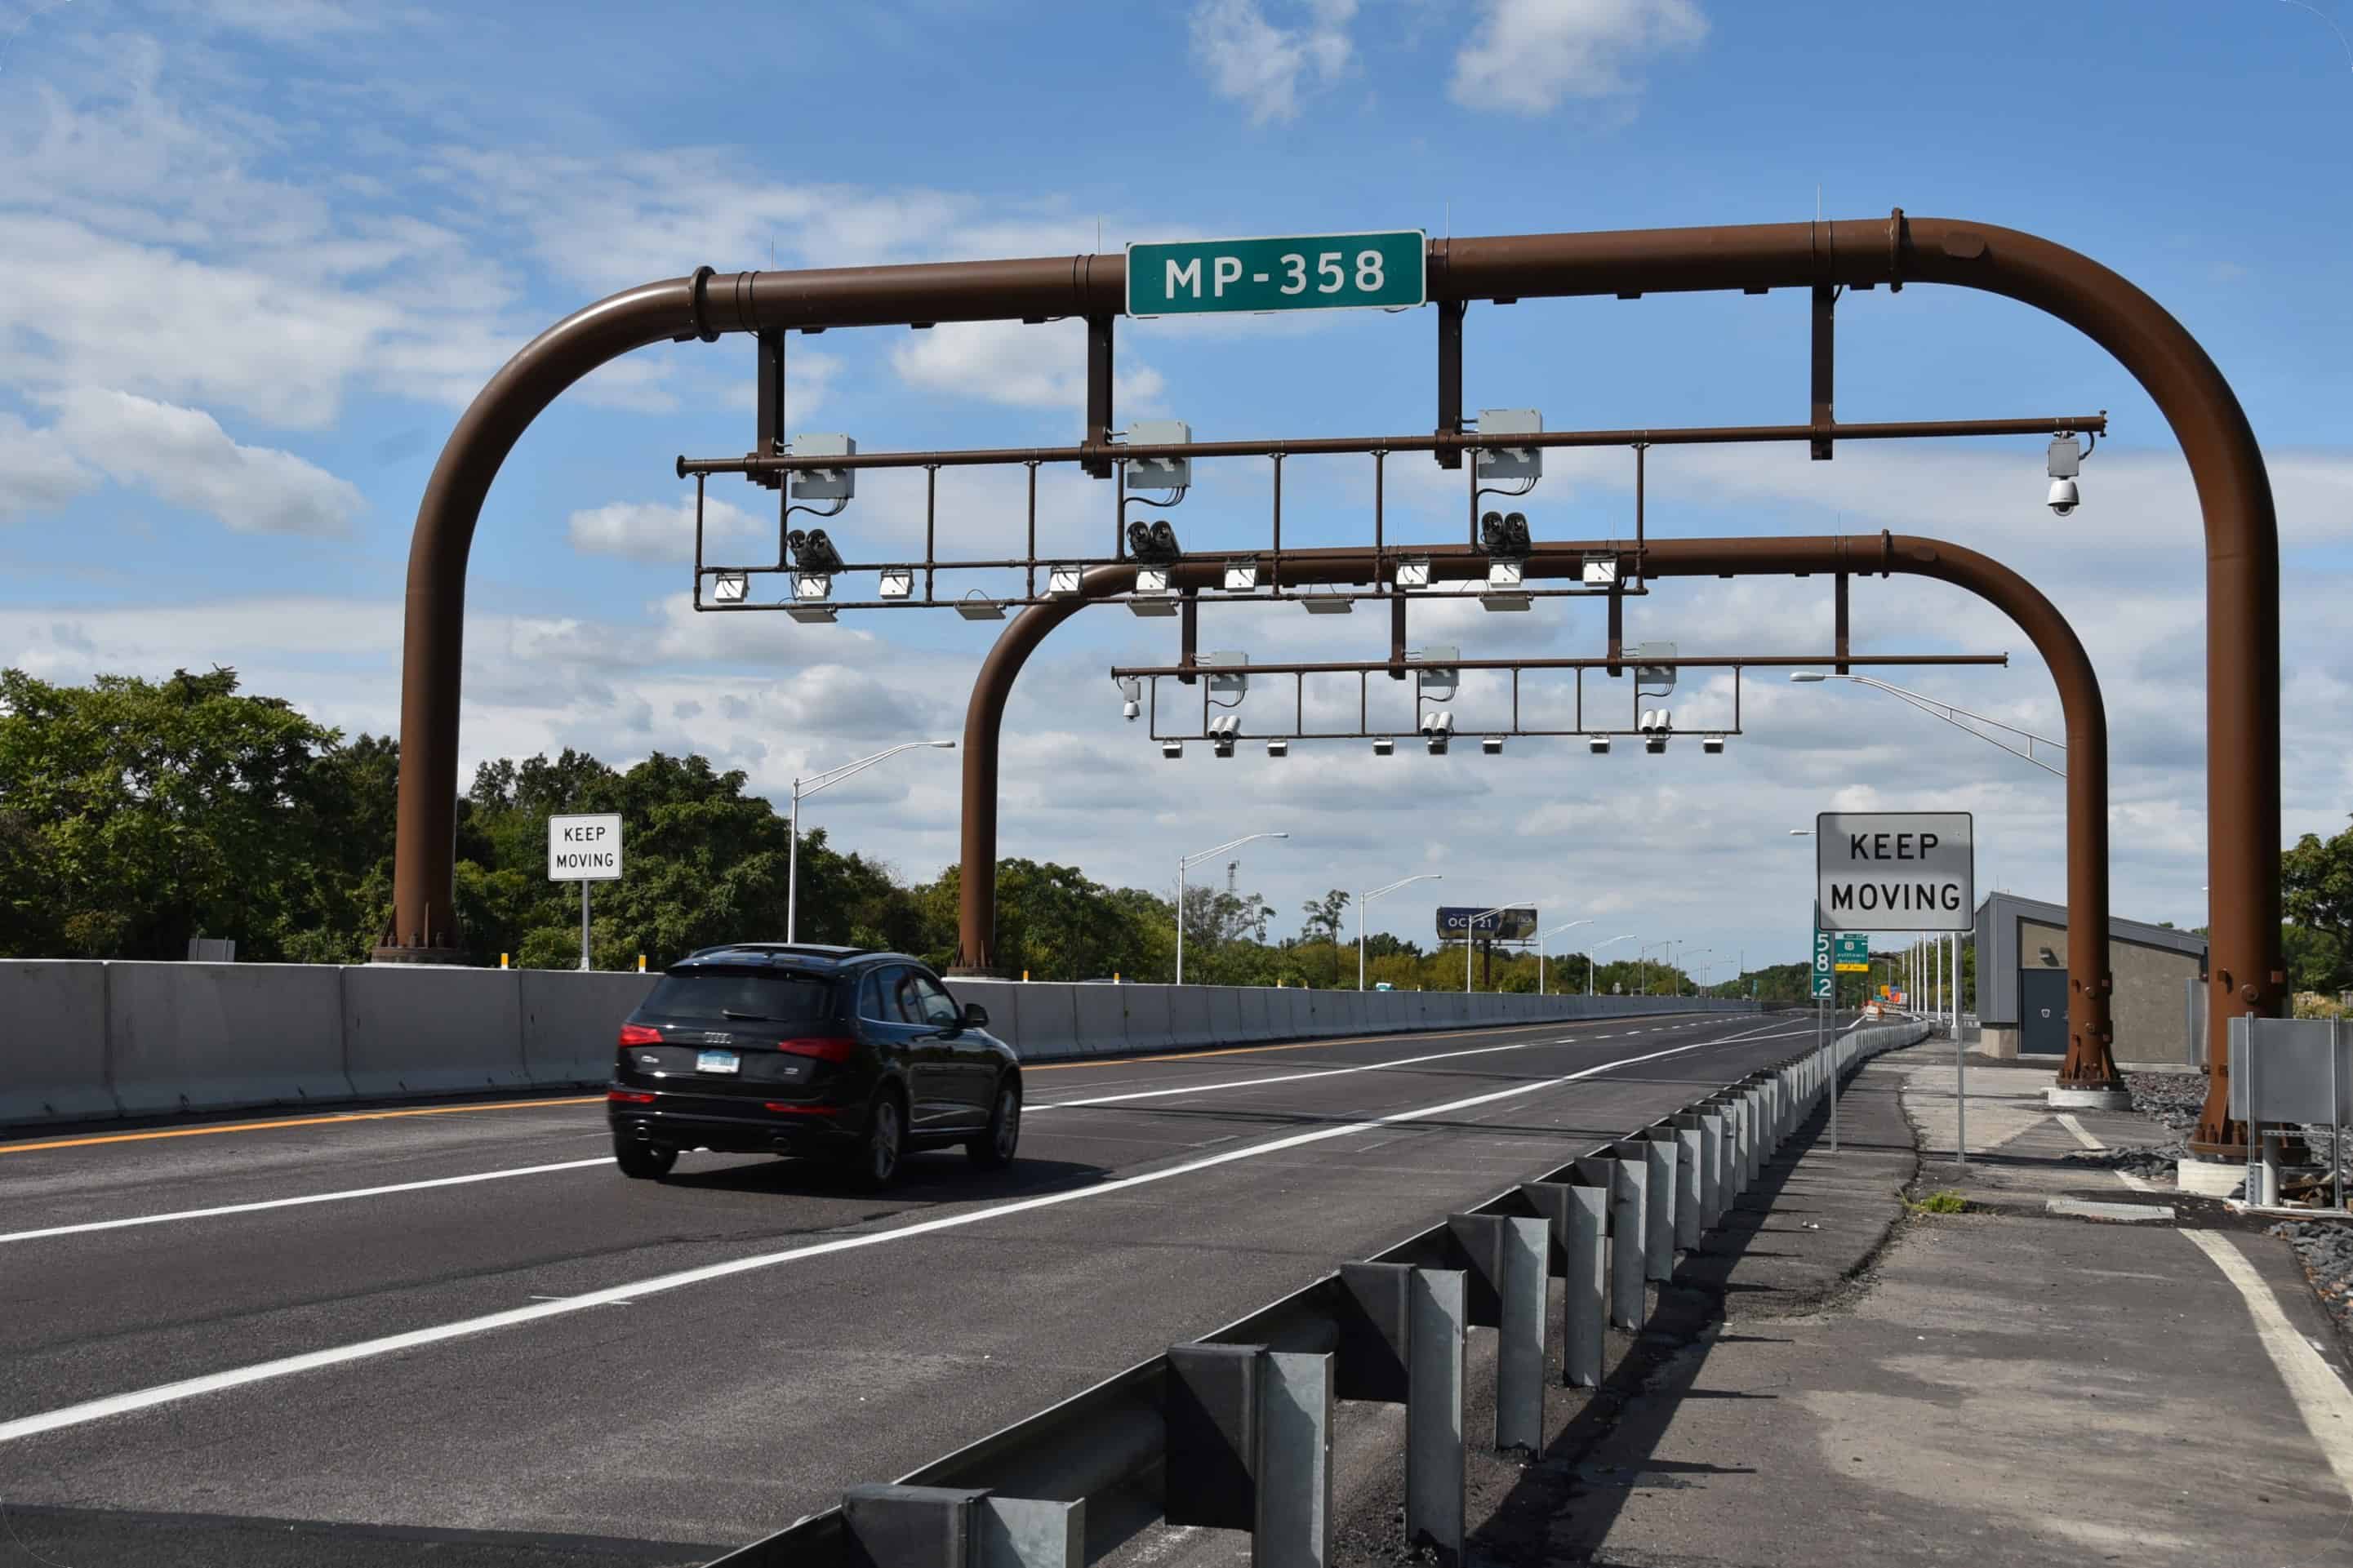 Two curved metal pipes with tolling camera devices extend over a highway.